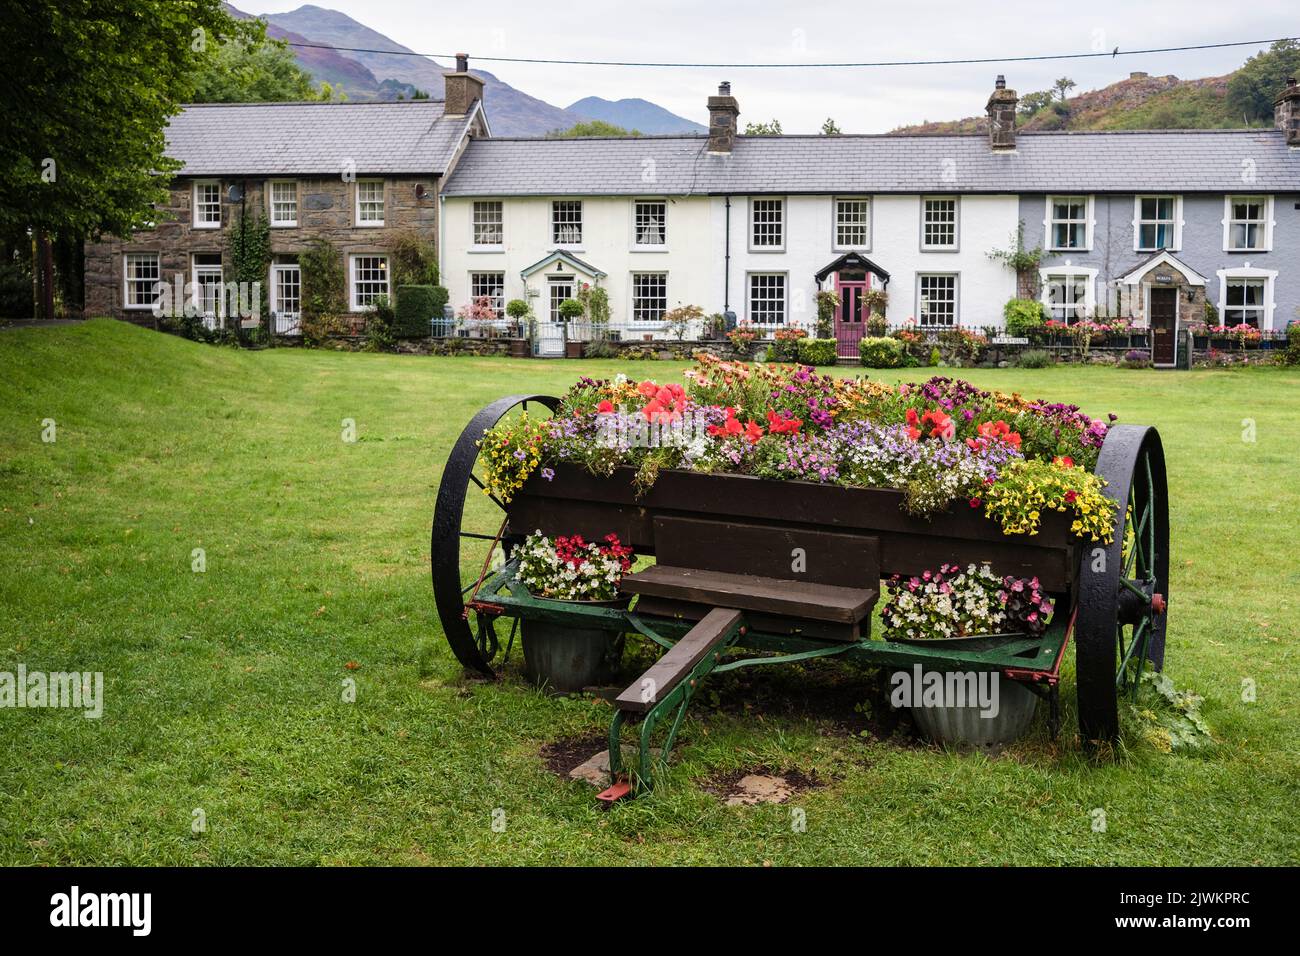 Flower container on village green with traditional old Welsh cottages in summer in Snowdonia National Park. Beddgelert Gwynedd North Wales UK Britain Stock Photo